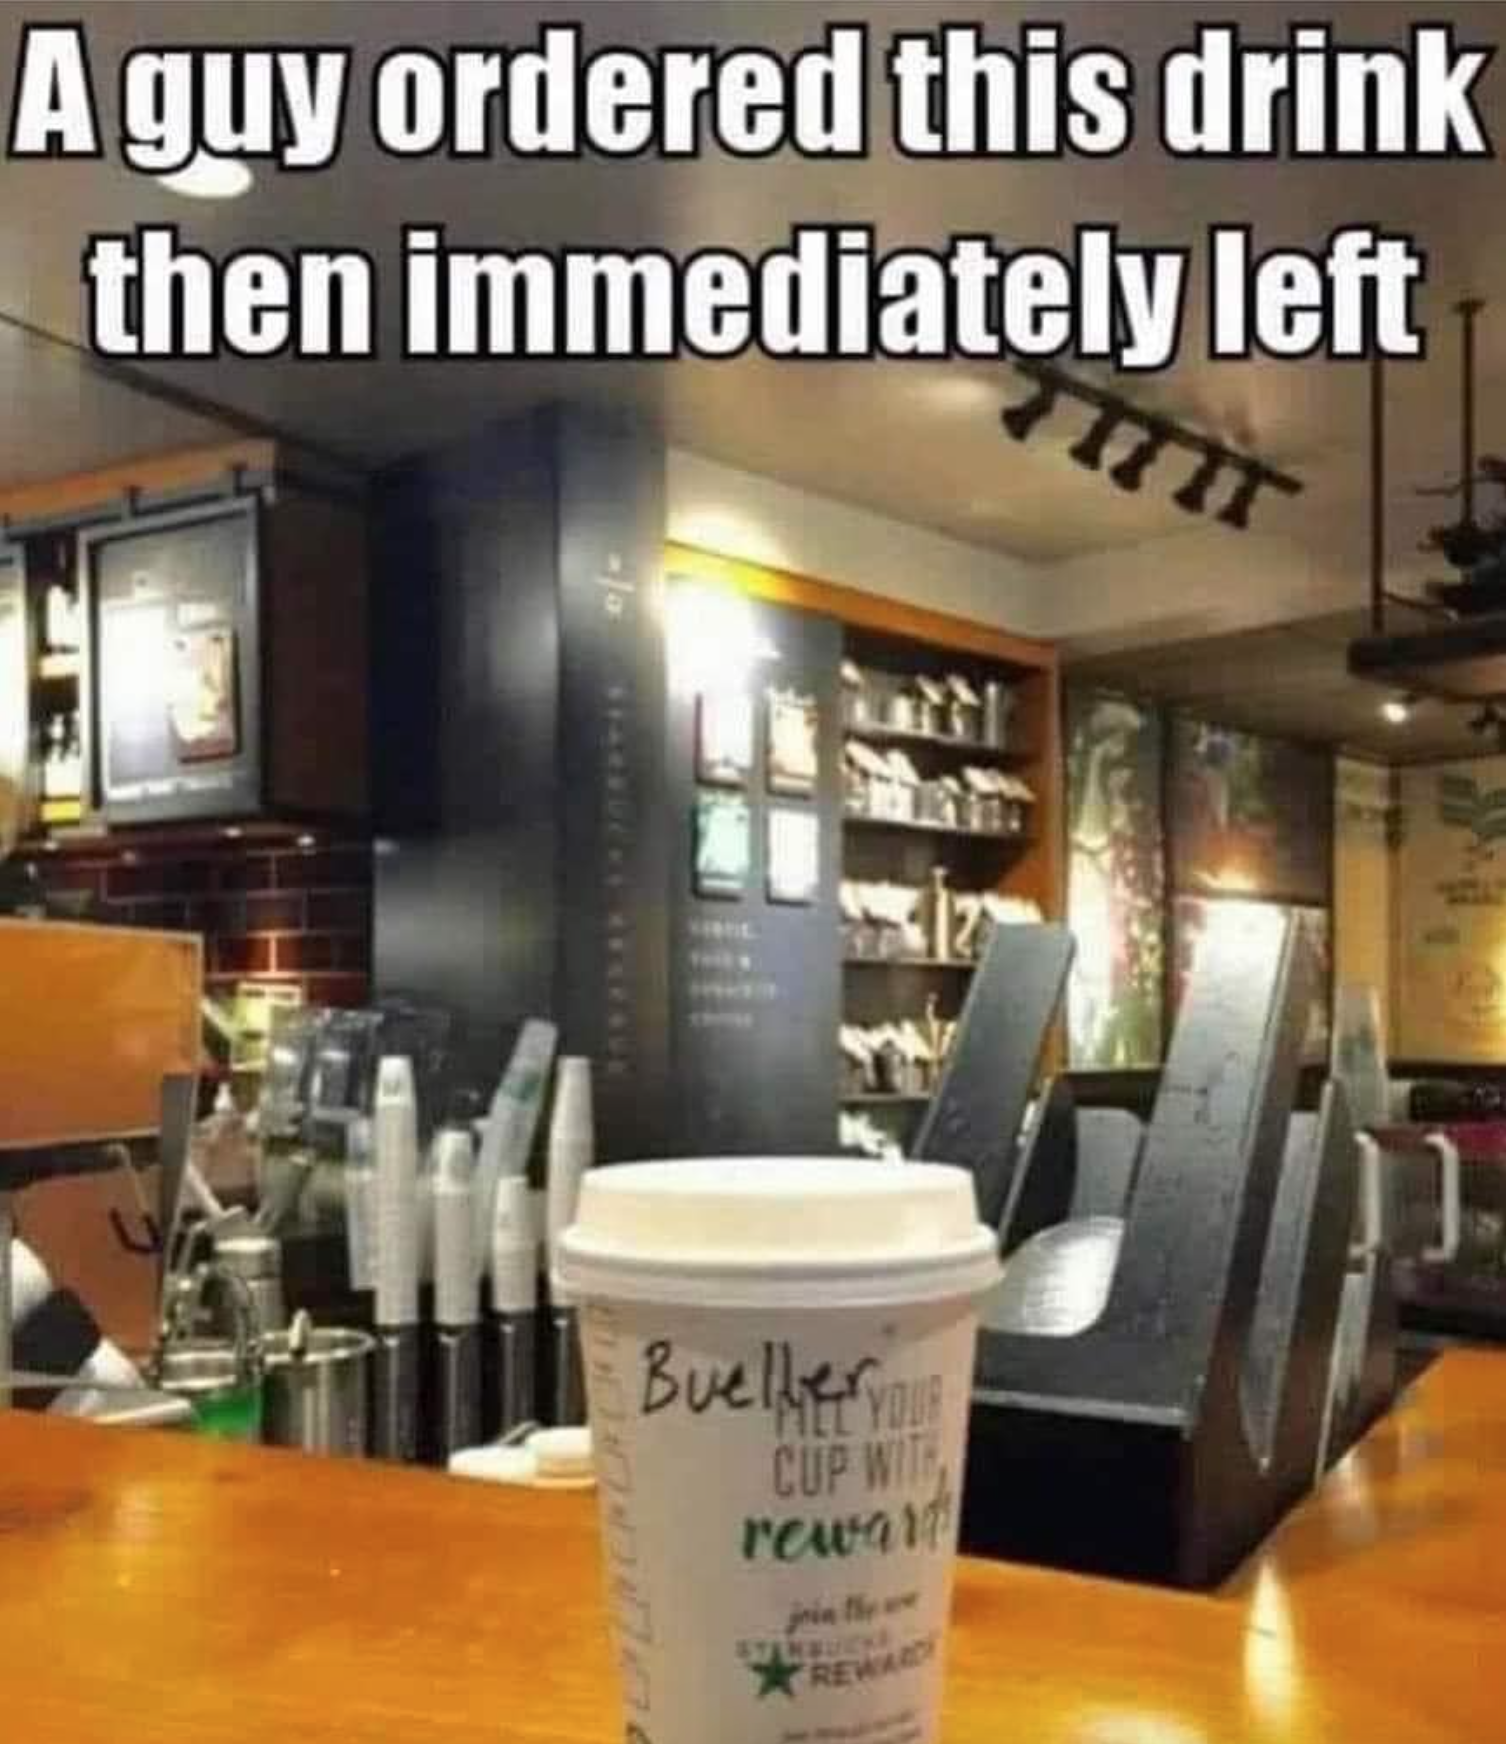 funny ferris bueller memes - A guy ordered this drink then immediately left Bueller You Cup It rewall